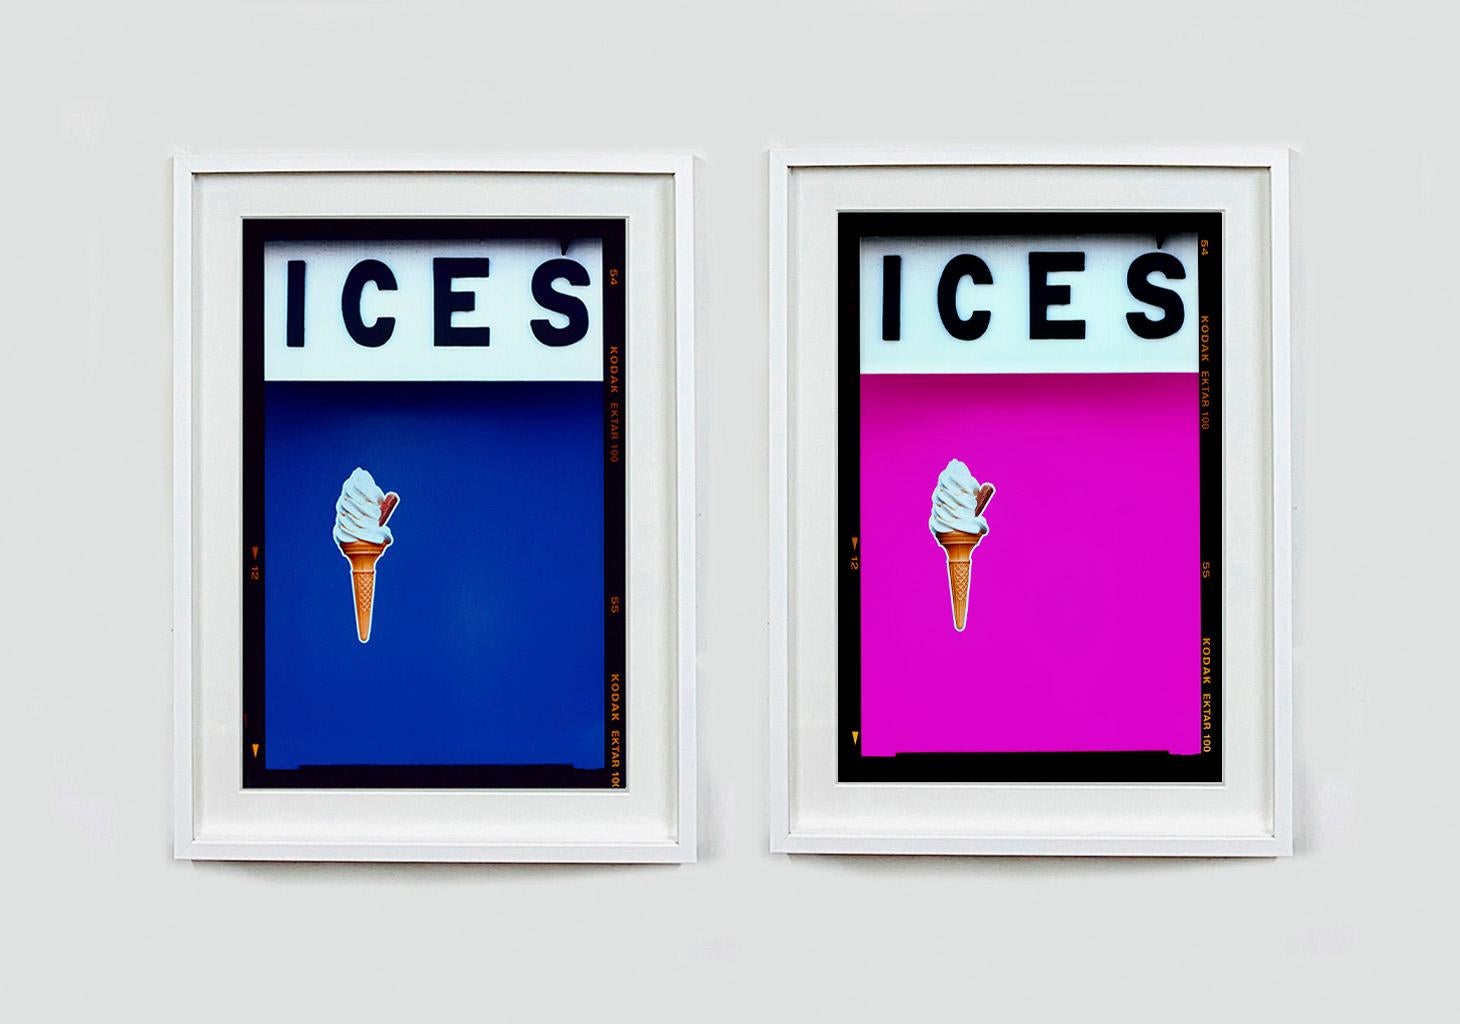 ICES, by Richard Heeps, photographed at the British Seaside at the end of summer 2020. This artwork is about evoking memories of the simple joy of days by the beach. The bold color blocking, typography and the surreal twist of the suspended ice